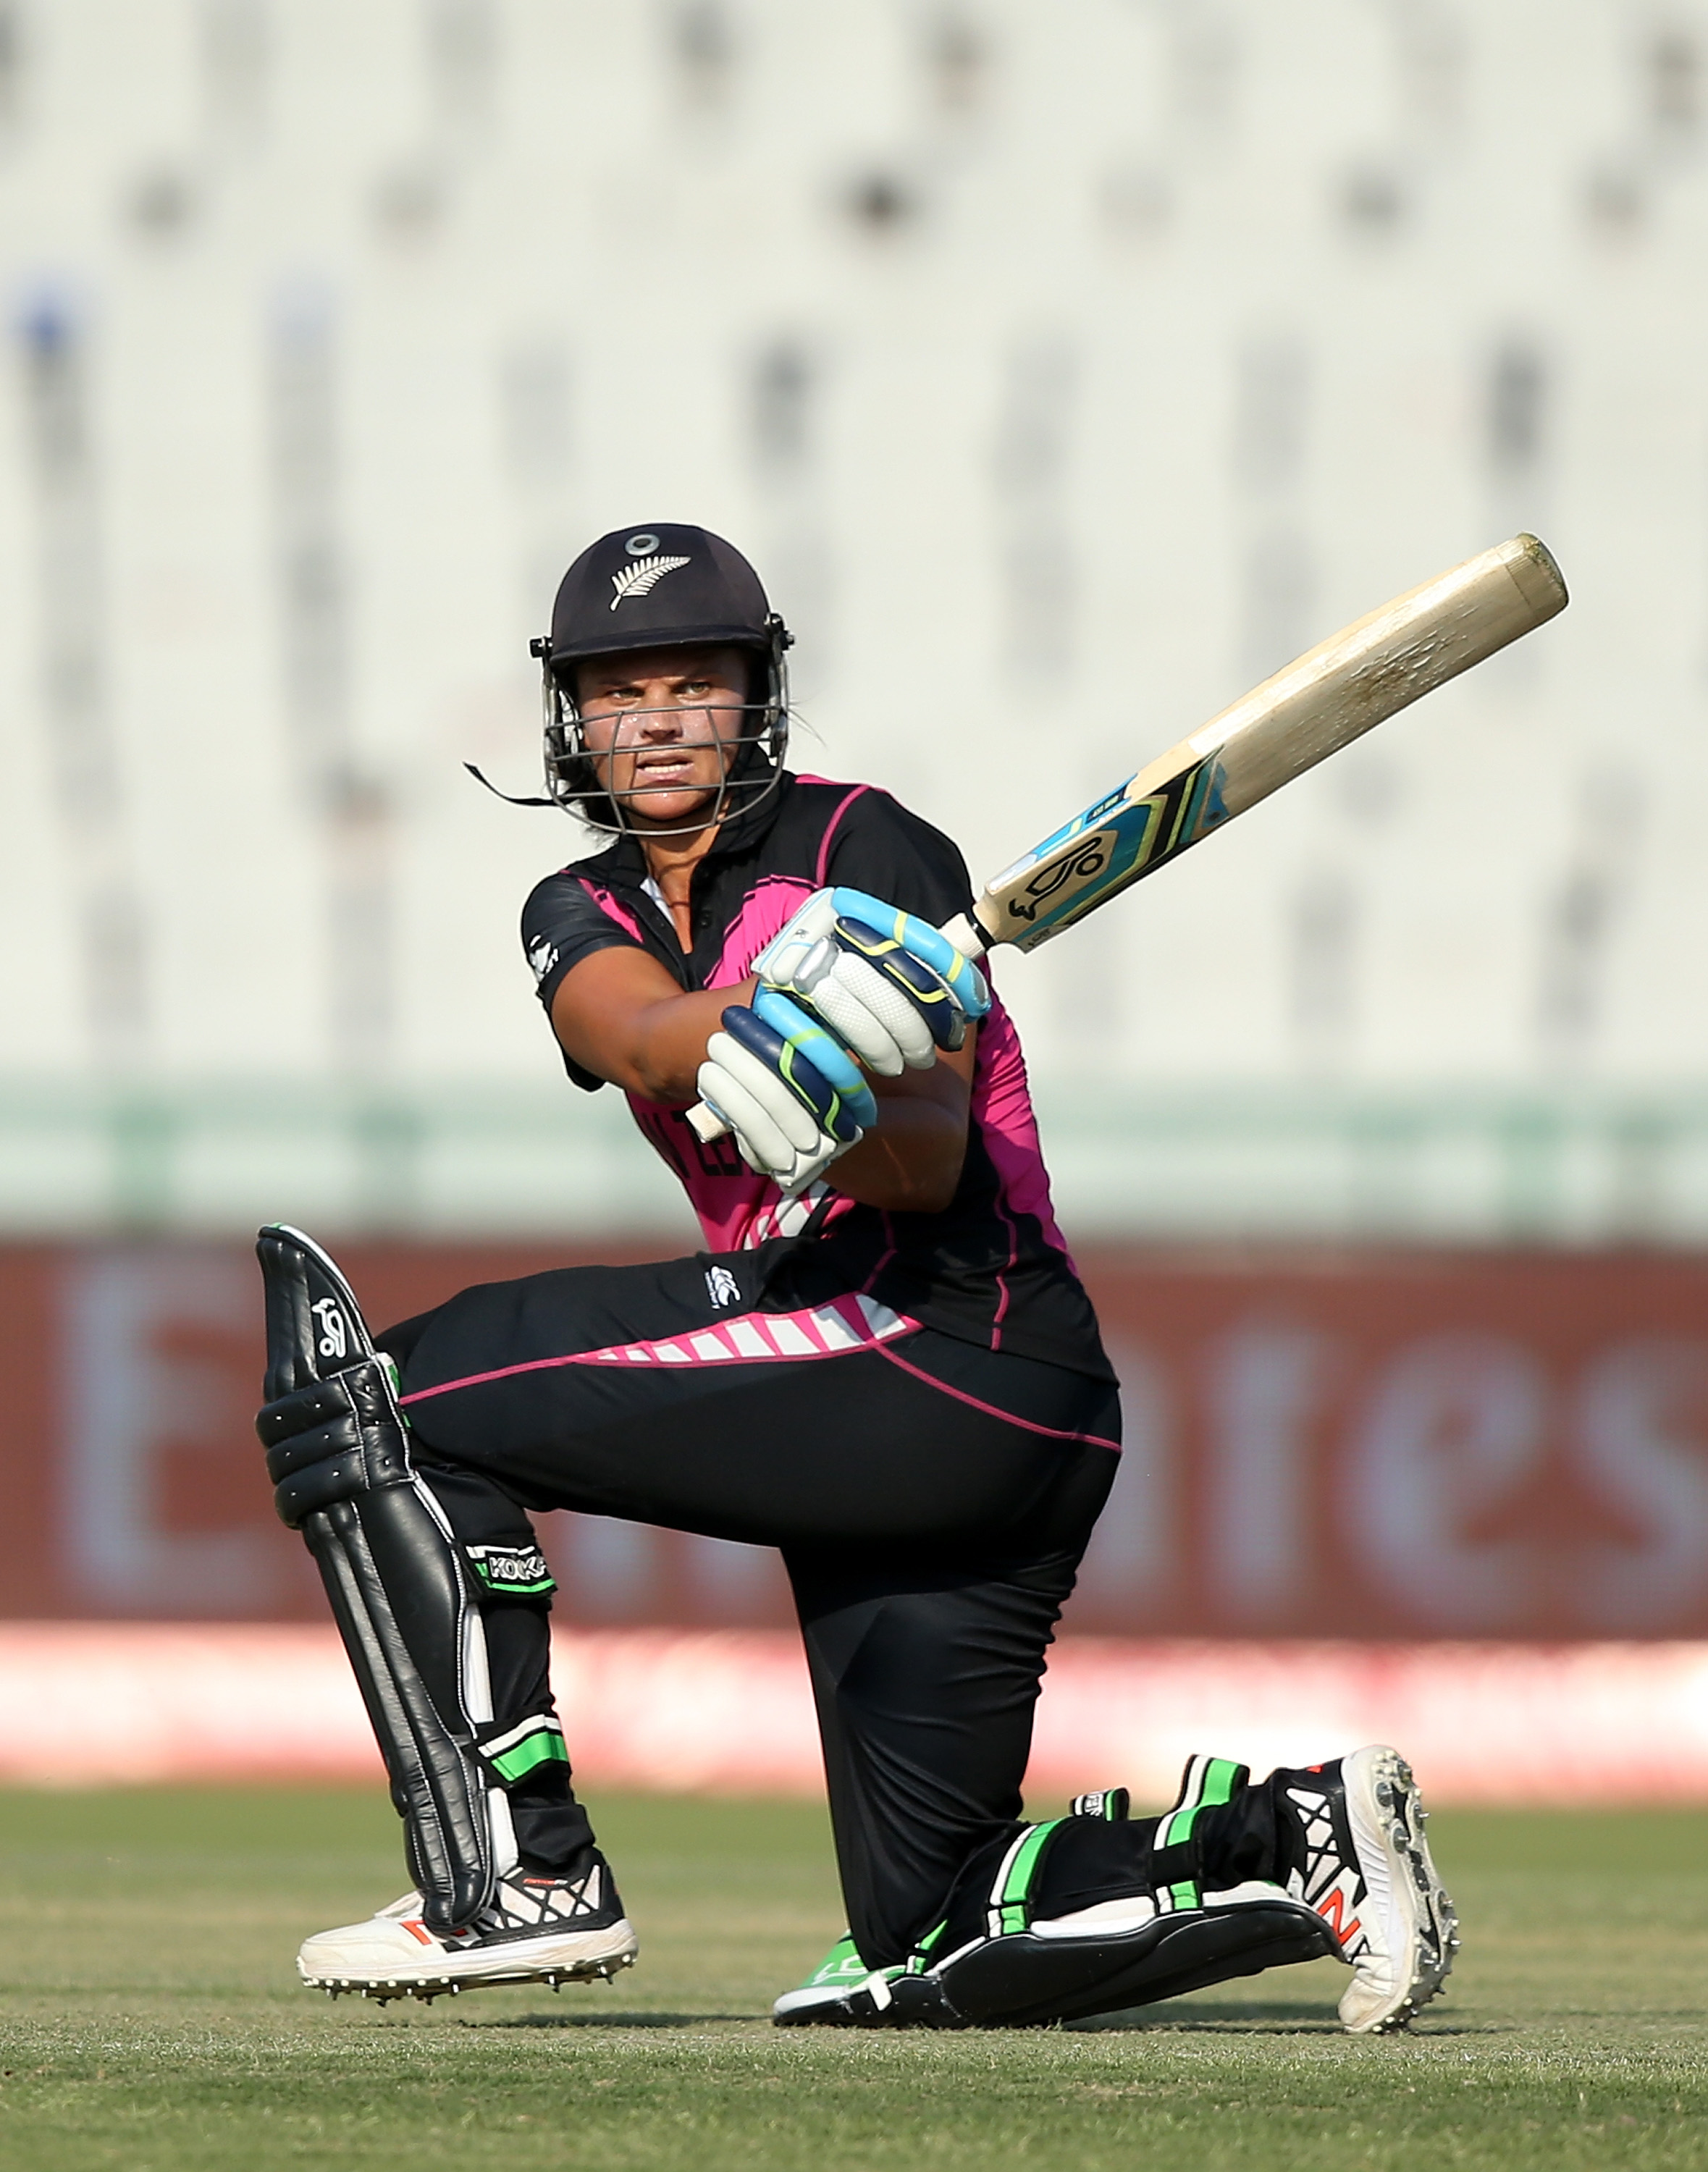 "MOHALI, INDIA - MARCH 18: Suzie Bates, Captain of New Zealand in action during the Women's ICC World Twenty20 India 2016 match between New Zealand and Ireland at the IS Bindra Stadium on March 18, 2016 in Mohali, India. (Photo by Jan Kruger-IDI/IDI via Getty Images)"